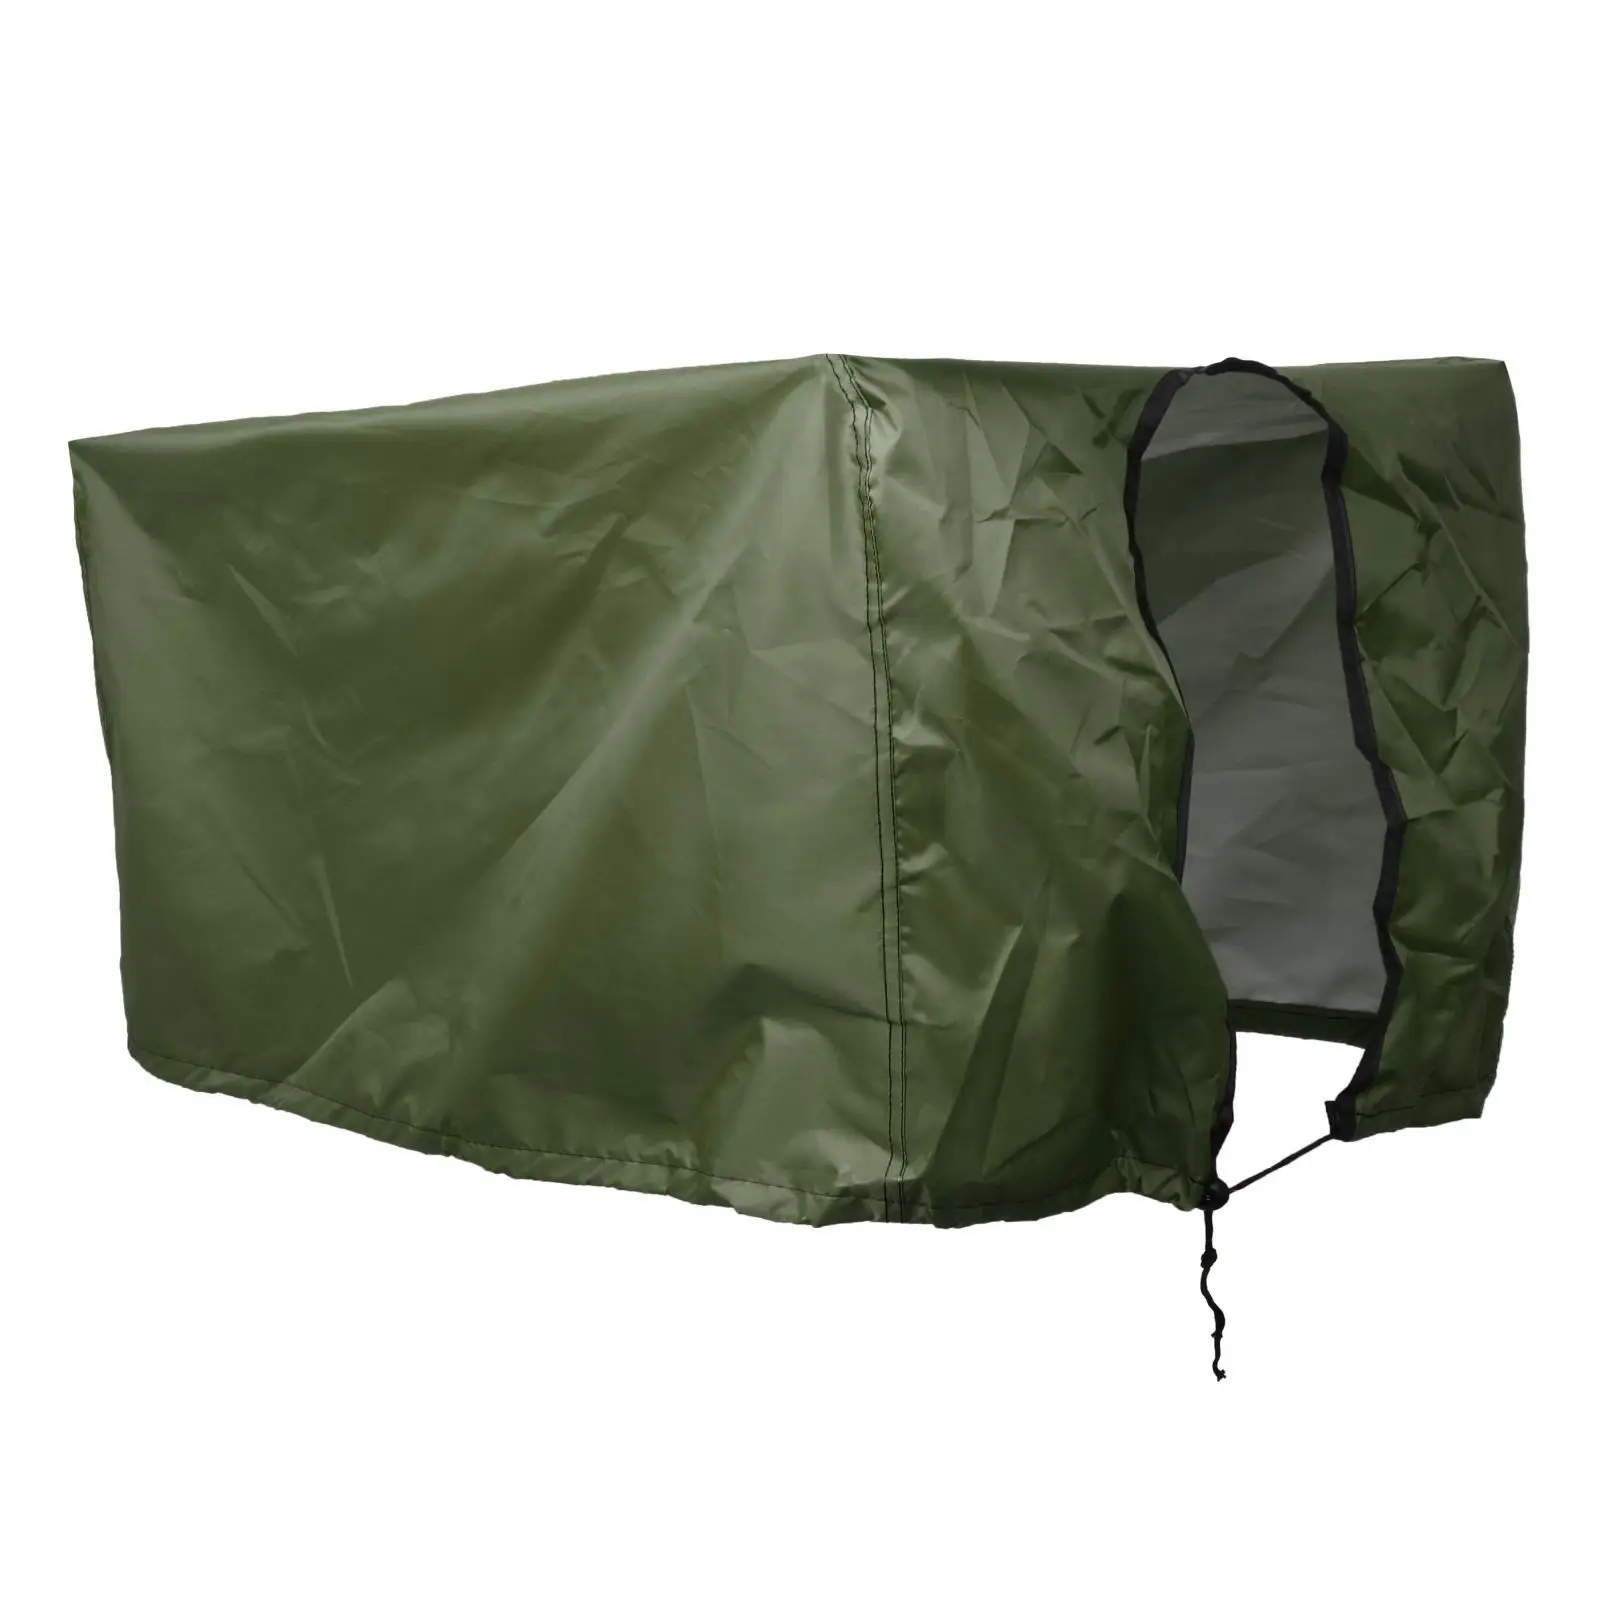 Utility Wagon Cart Cover Water Resistant Garden Cart Cover Wagon Protective Cover for Folding Trolley Cart Beach Cart